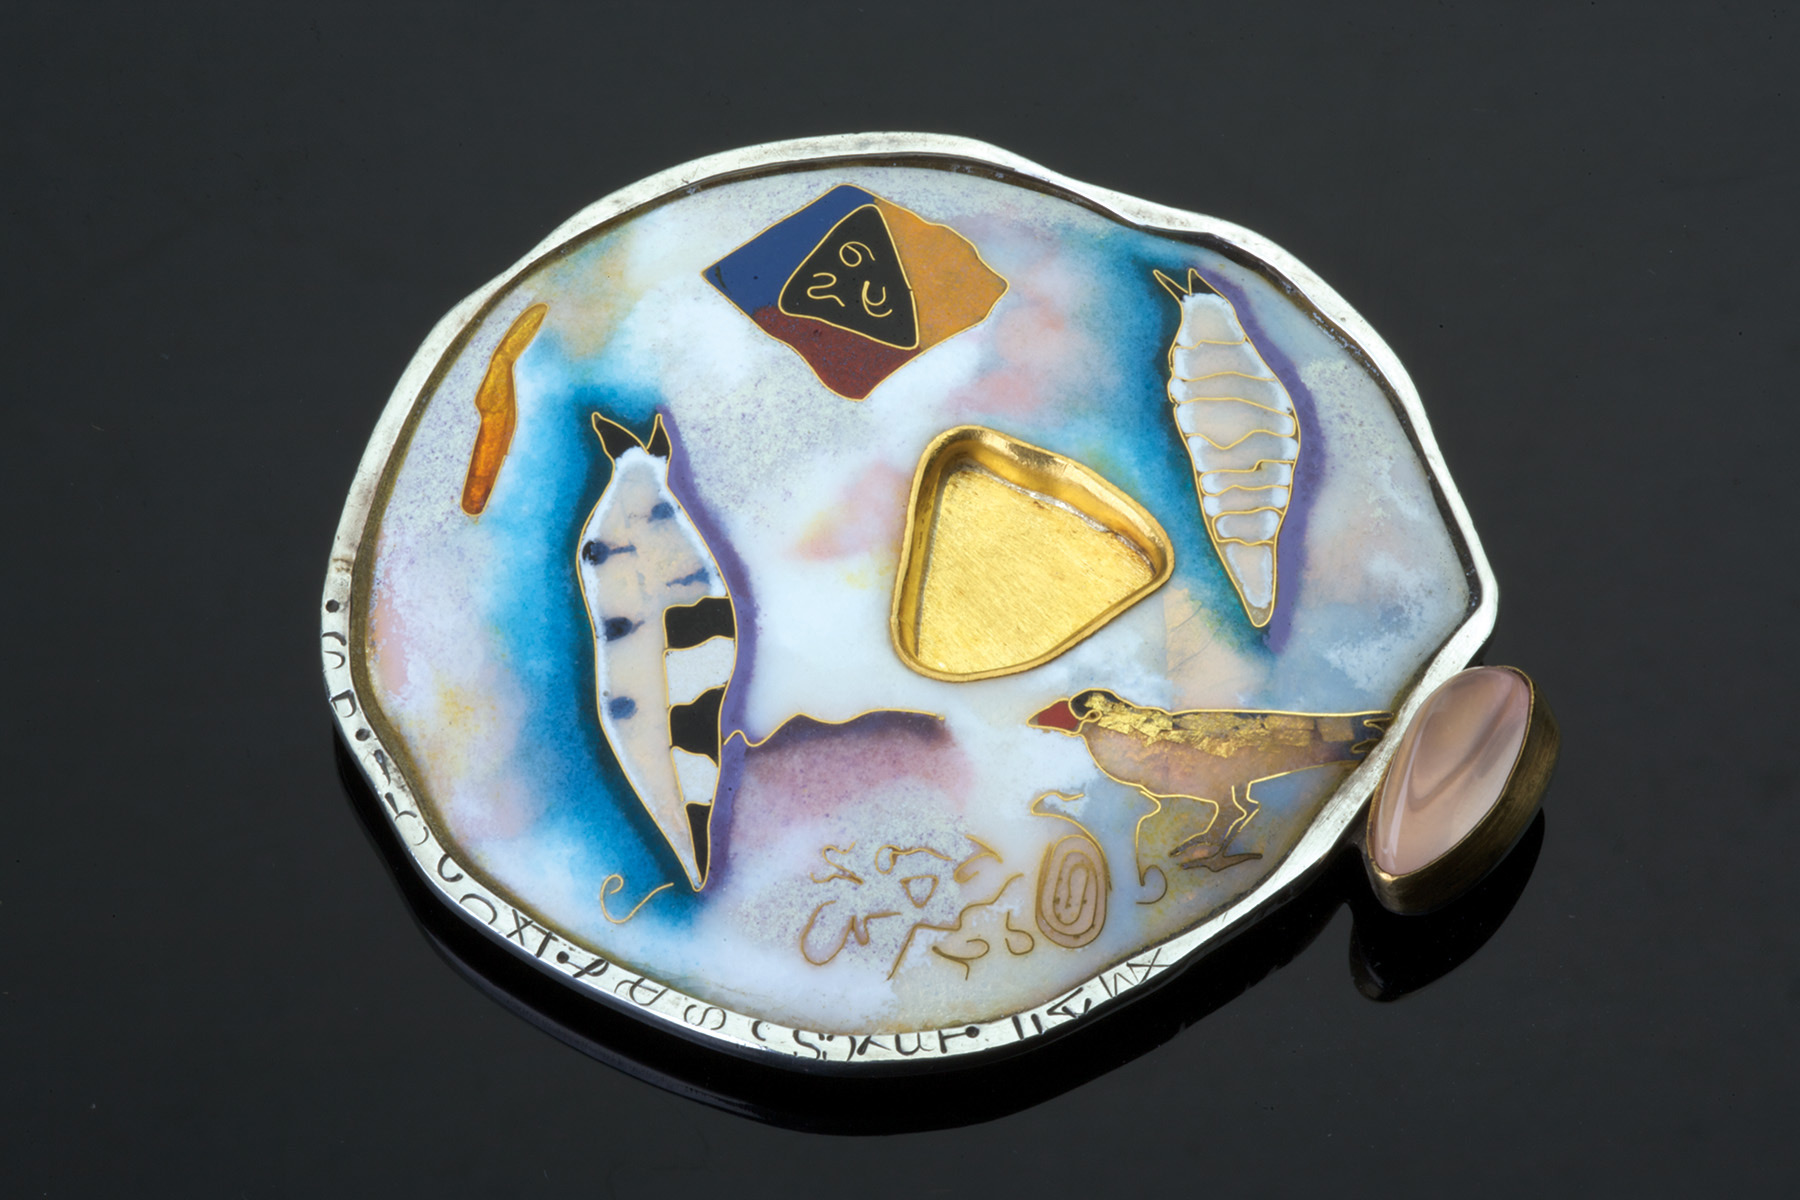 Rounded brooch with various illustrated designs